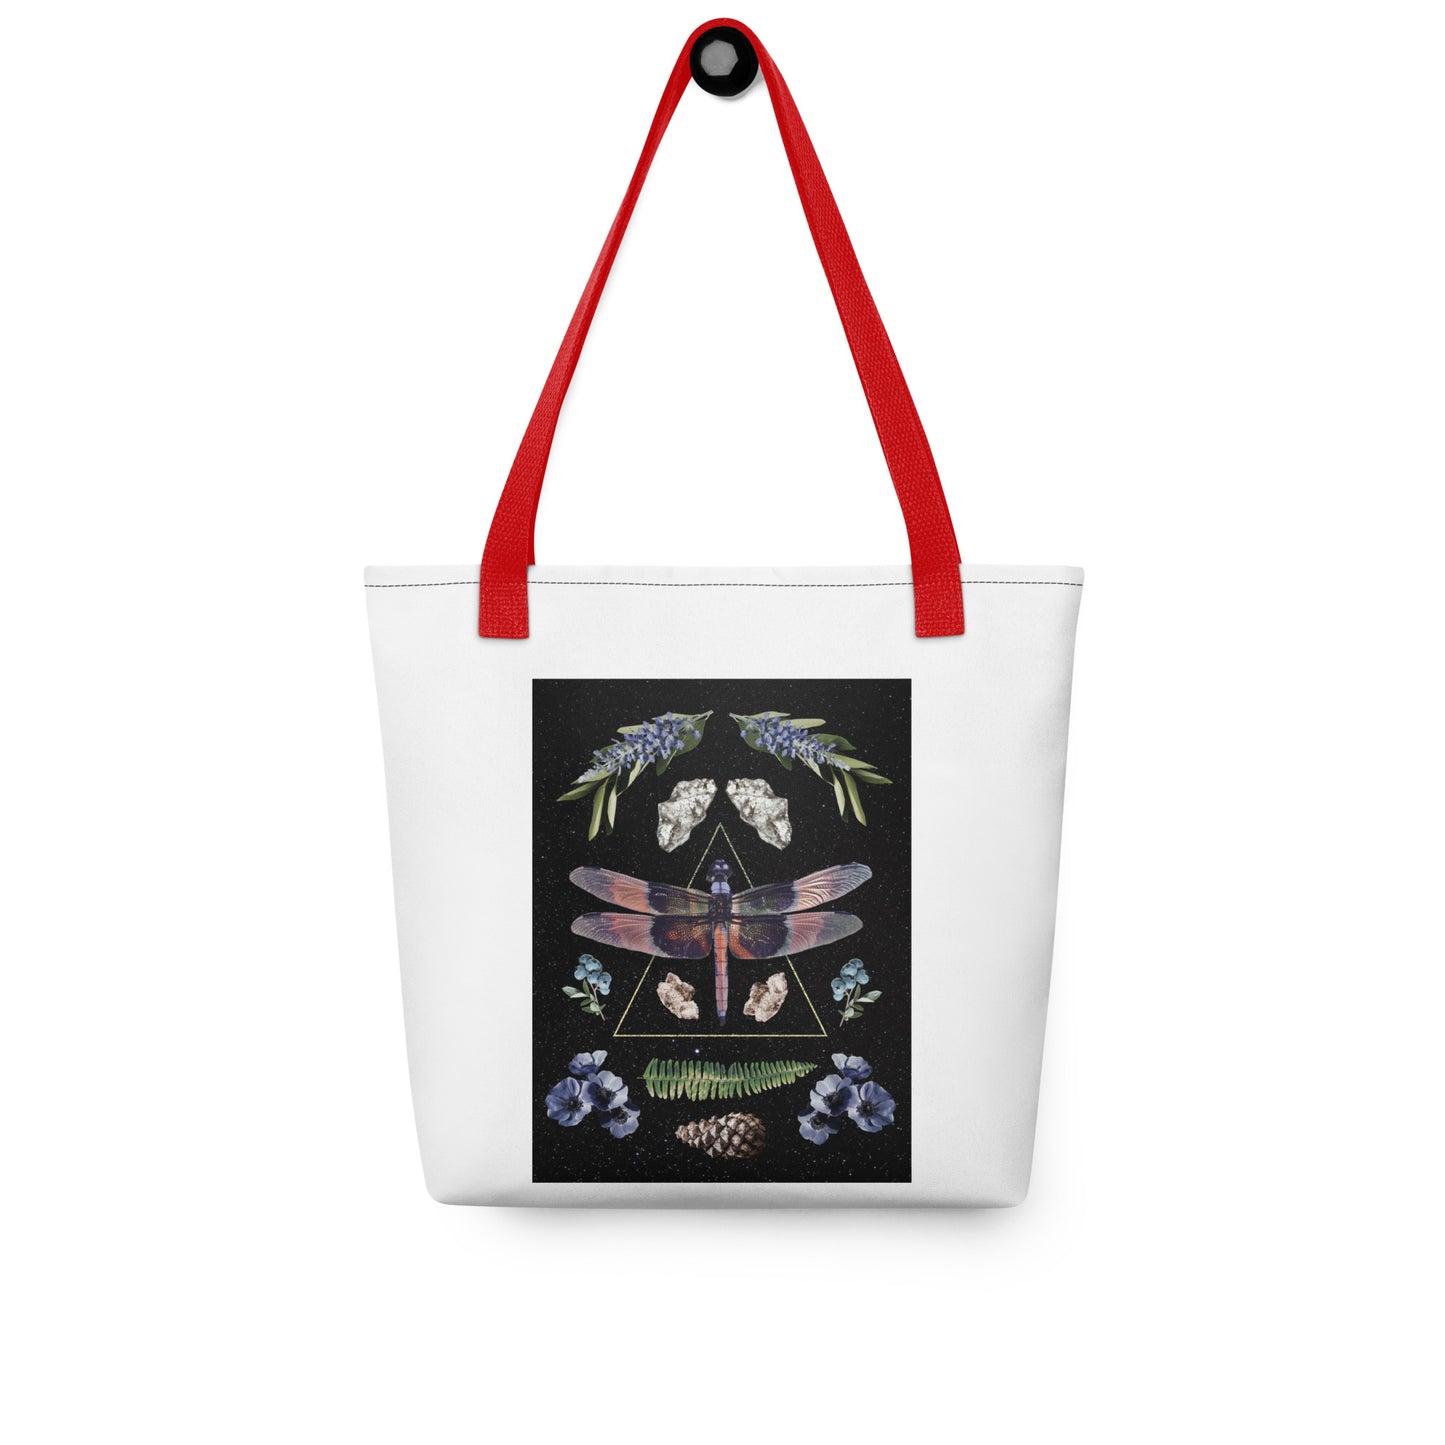 Gorgeous Woodland Dragonfly Tote bag